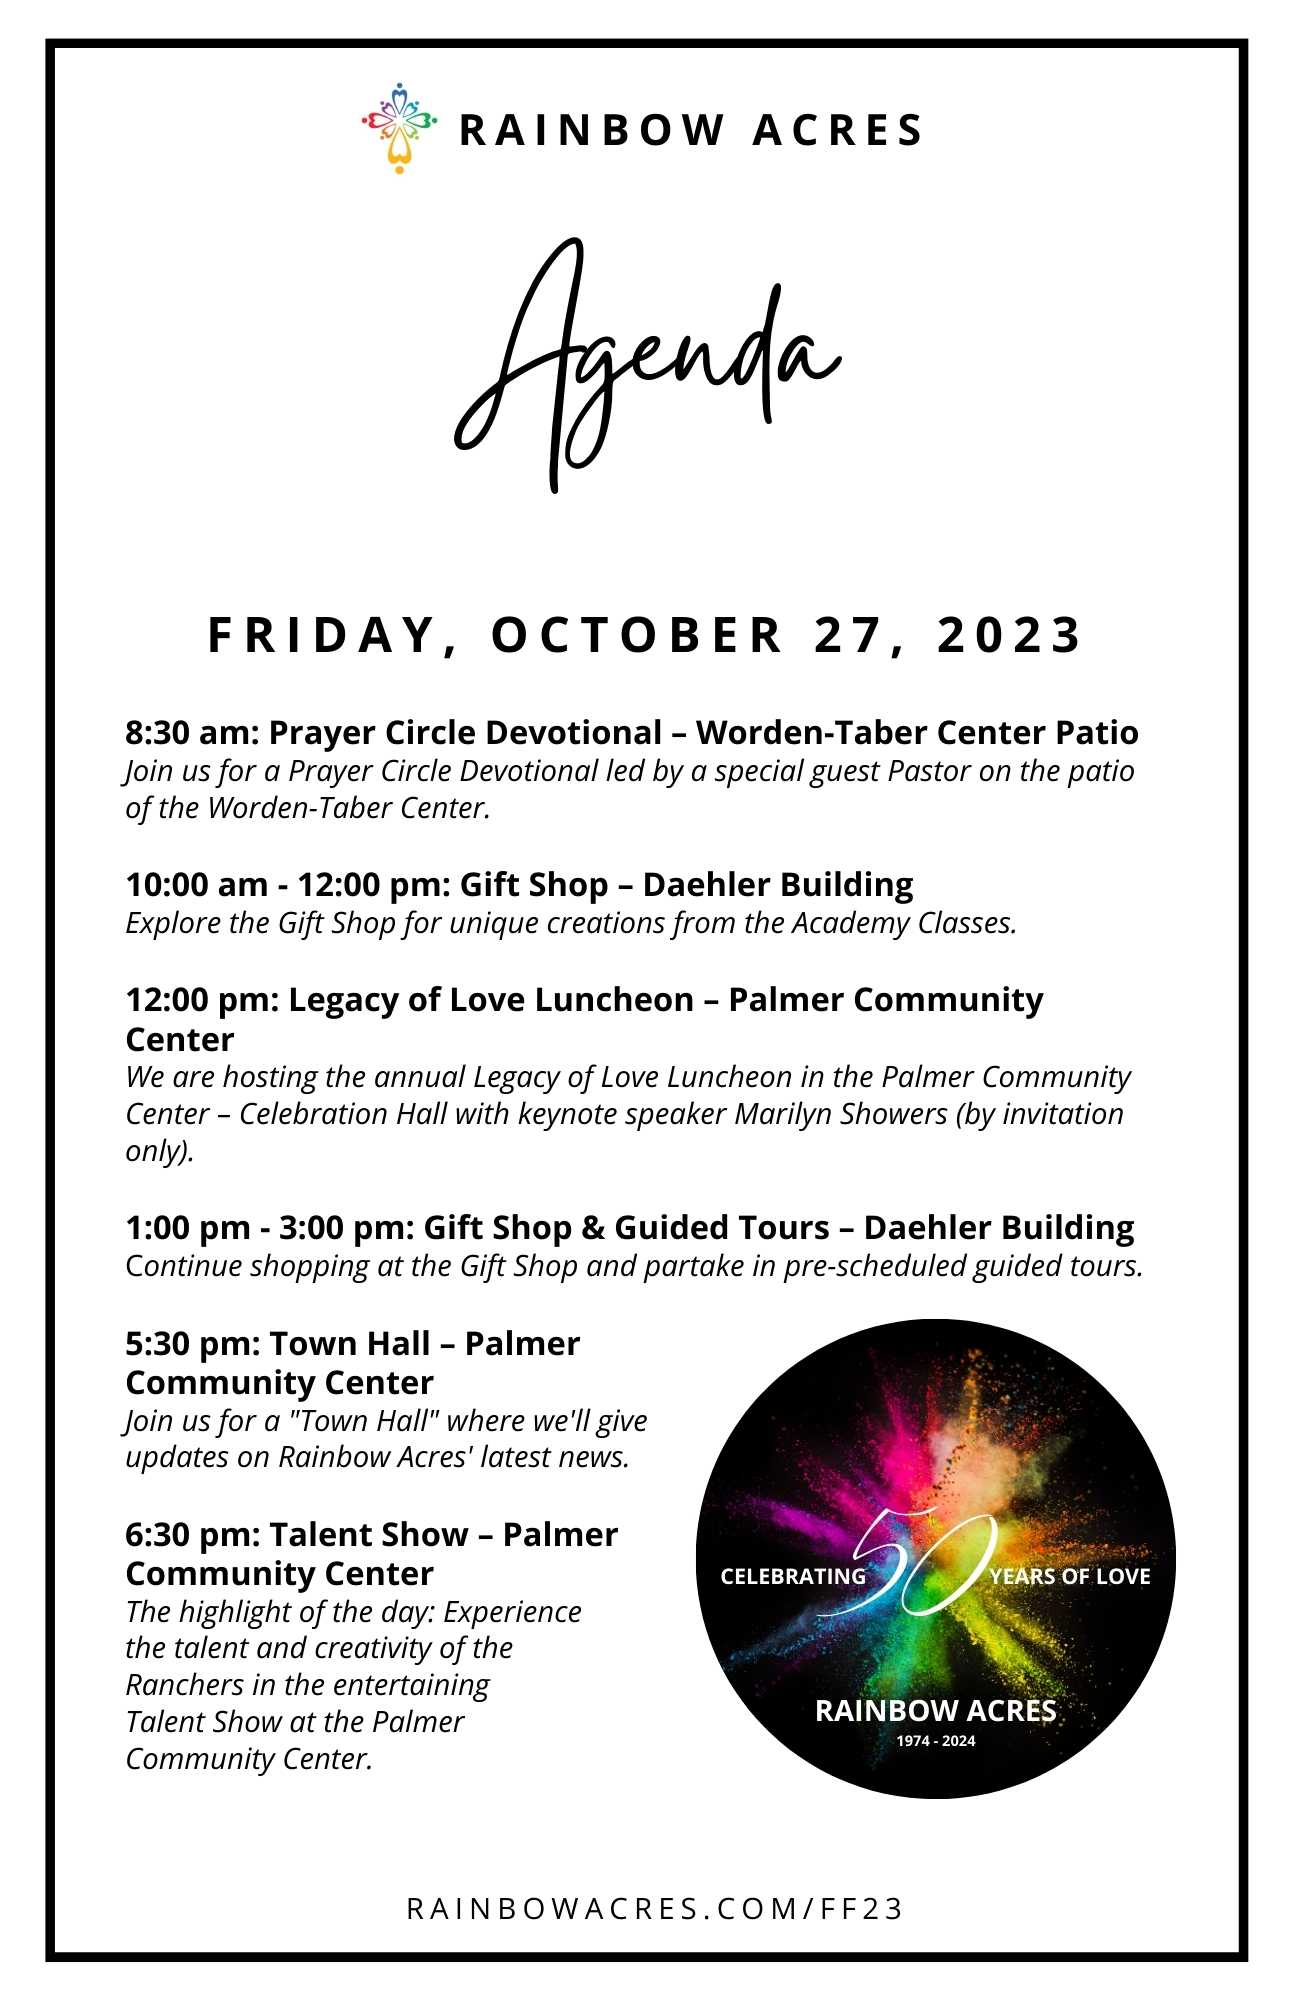 Agenda for family and friends weekend Friday October 27, 2023